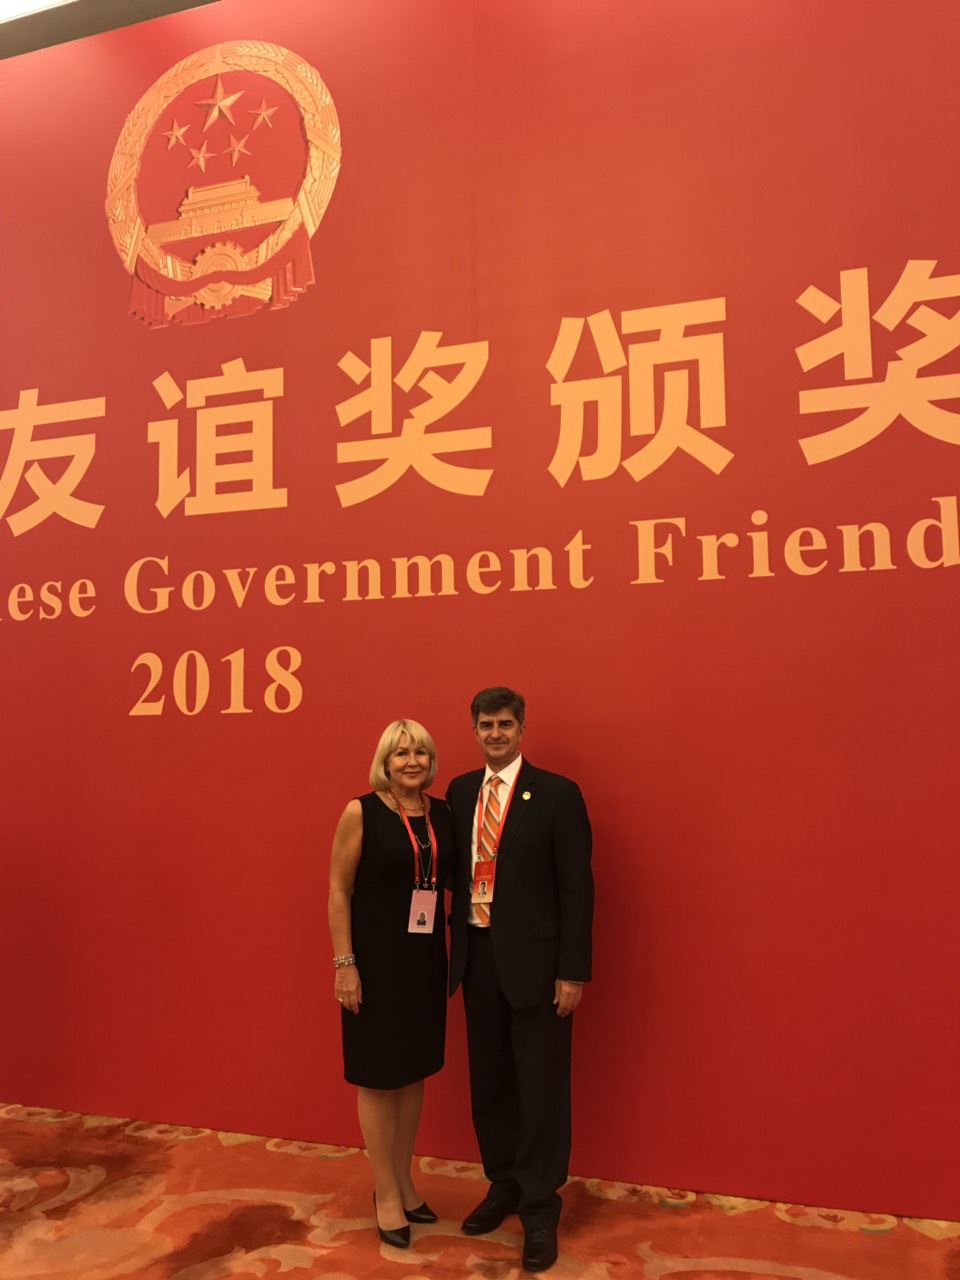 Professor Yury Gogotsi and his wife Larissa Gogotsi at Chineese Government Friendship Award ceremony in Great Hall of the People, in Beijing on September 29, 2018